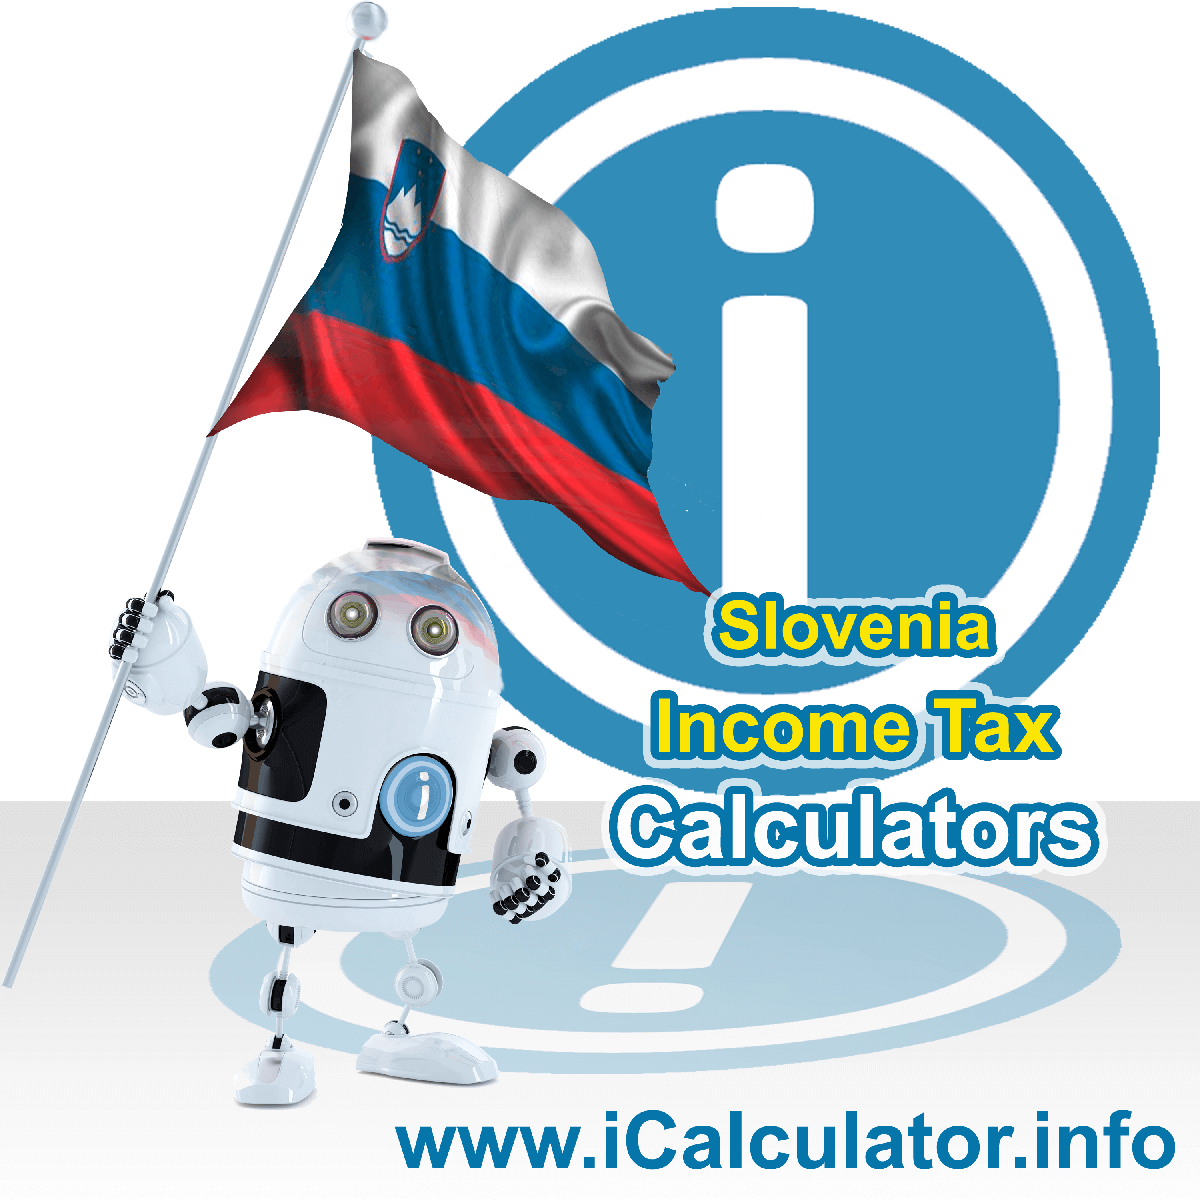 Slovenia Income Tax Calculator. This image shows a new employer in Slovenia calculating the annual payroll costs based on multiple payroll payments in one year in Slovenia using the Slovenia income tax calculator to understand their payroll costs in Slovenia in 2022